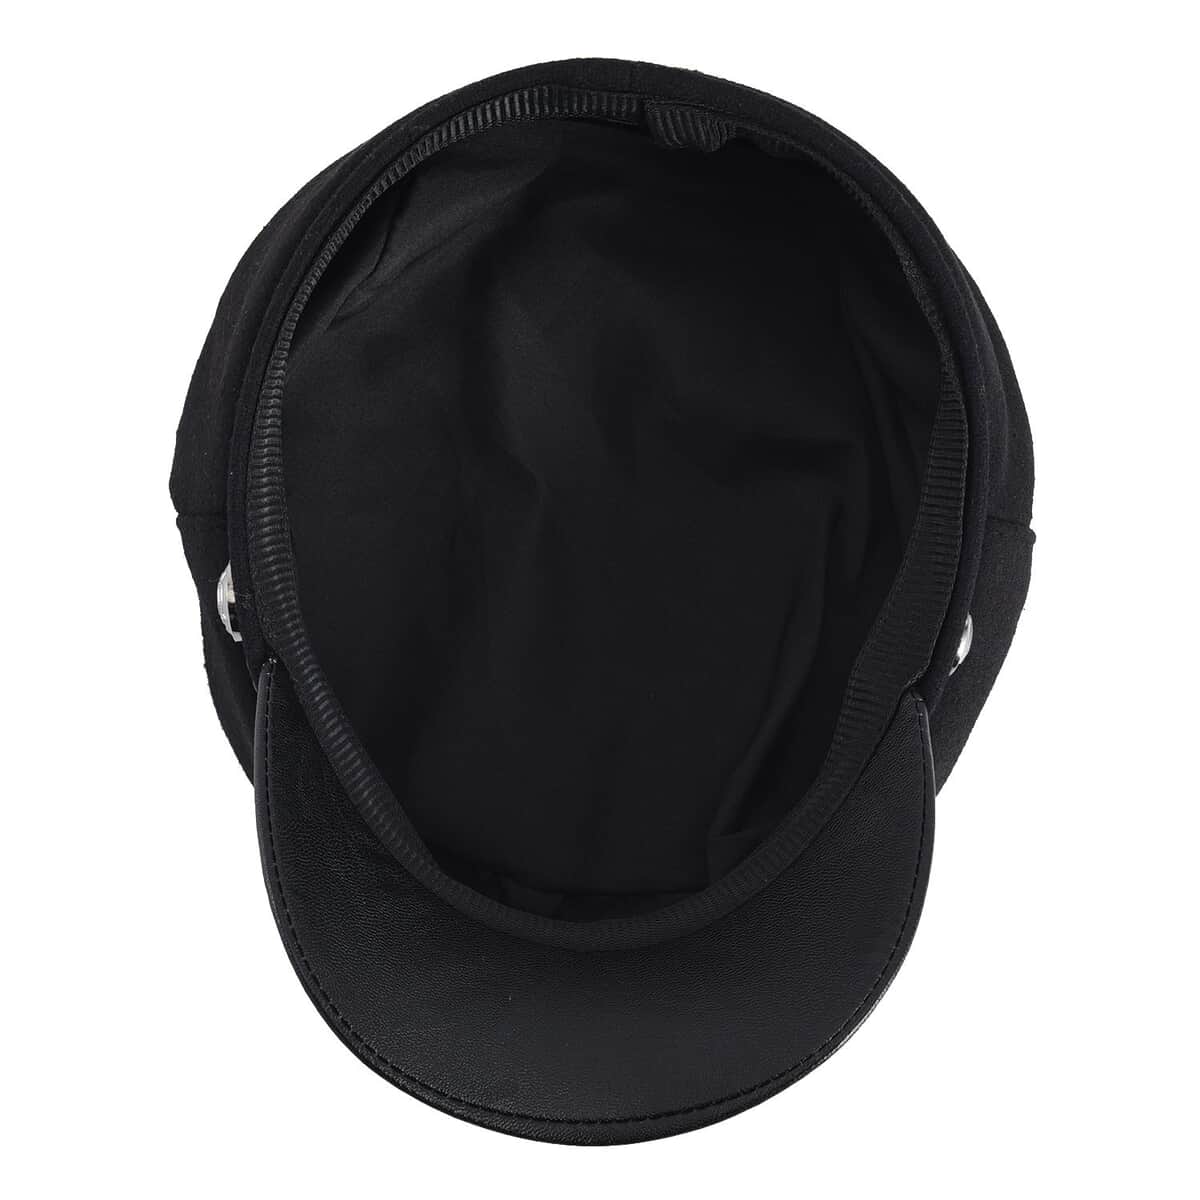 Black Fiddler Cap - (Diameter 22-23 Inches and Height -2.75 Inches) image number 4